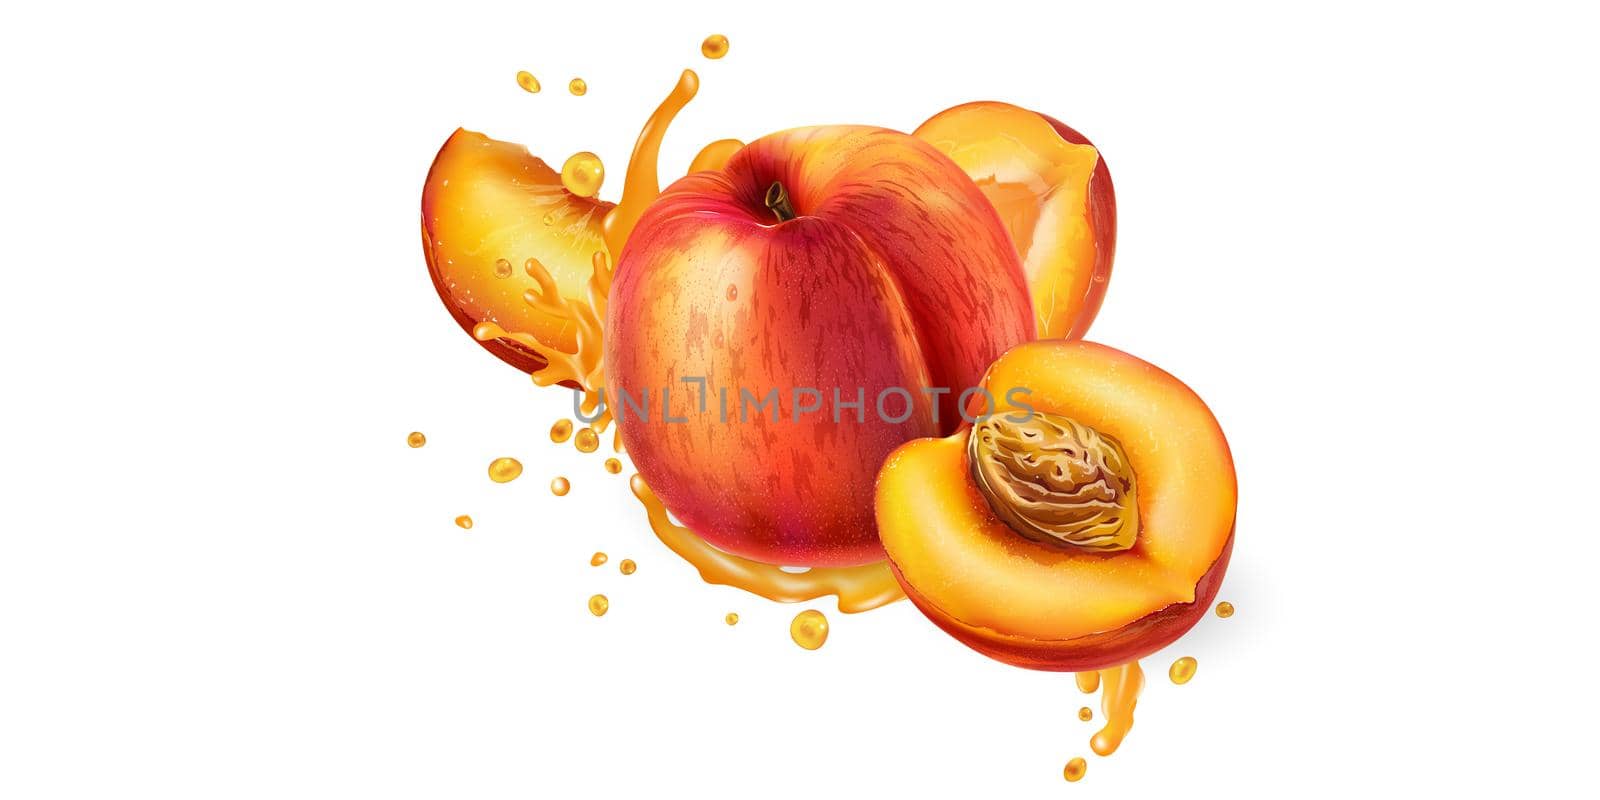 Fresh peaches in splashes of fruit juice on a white background. Realistic style illustration.